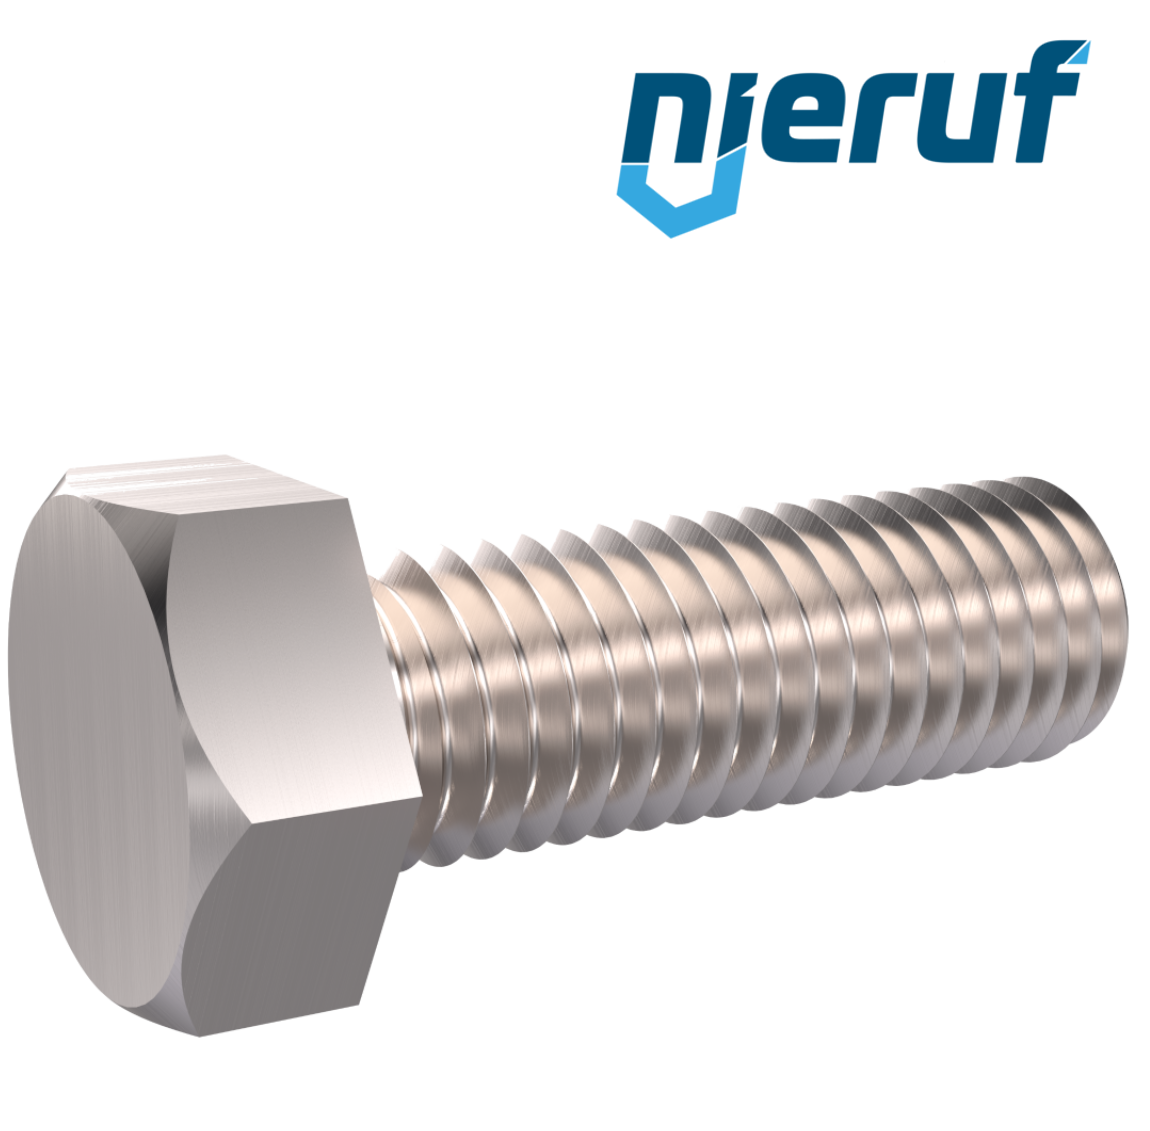 screw M12x60 mm stainless steel A2